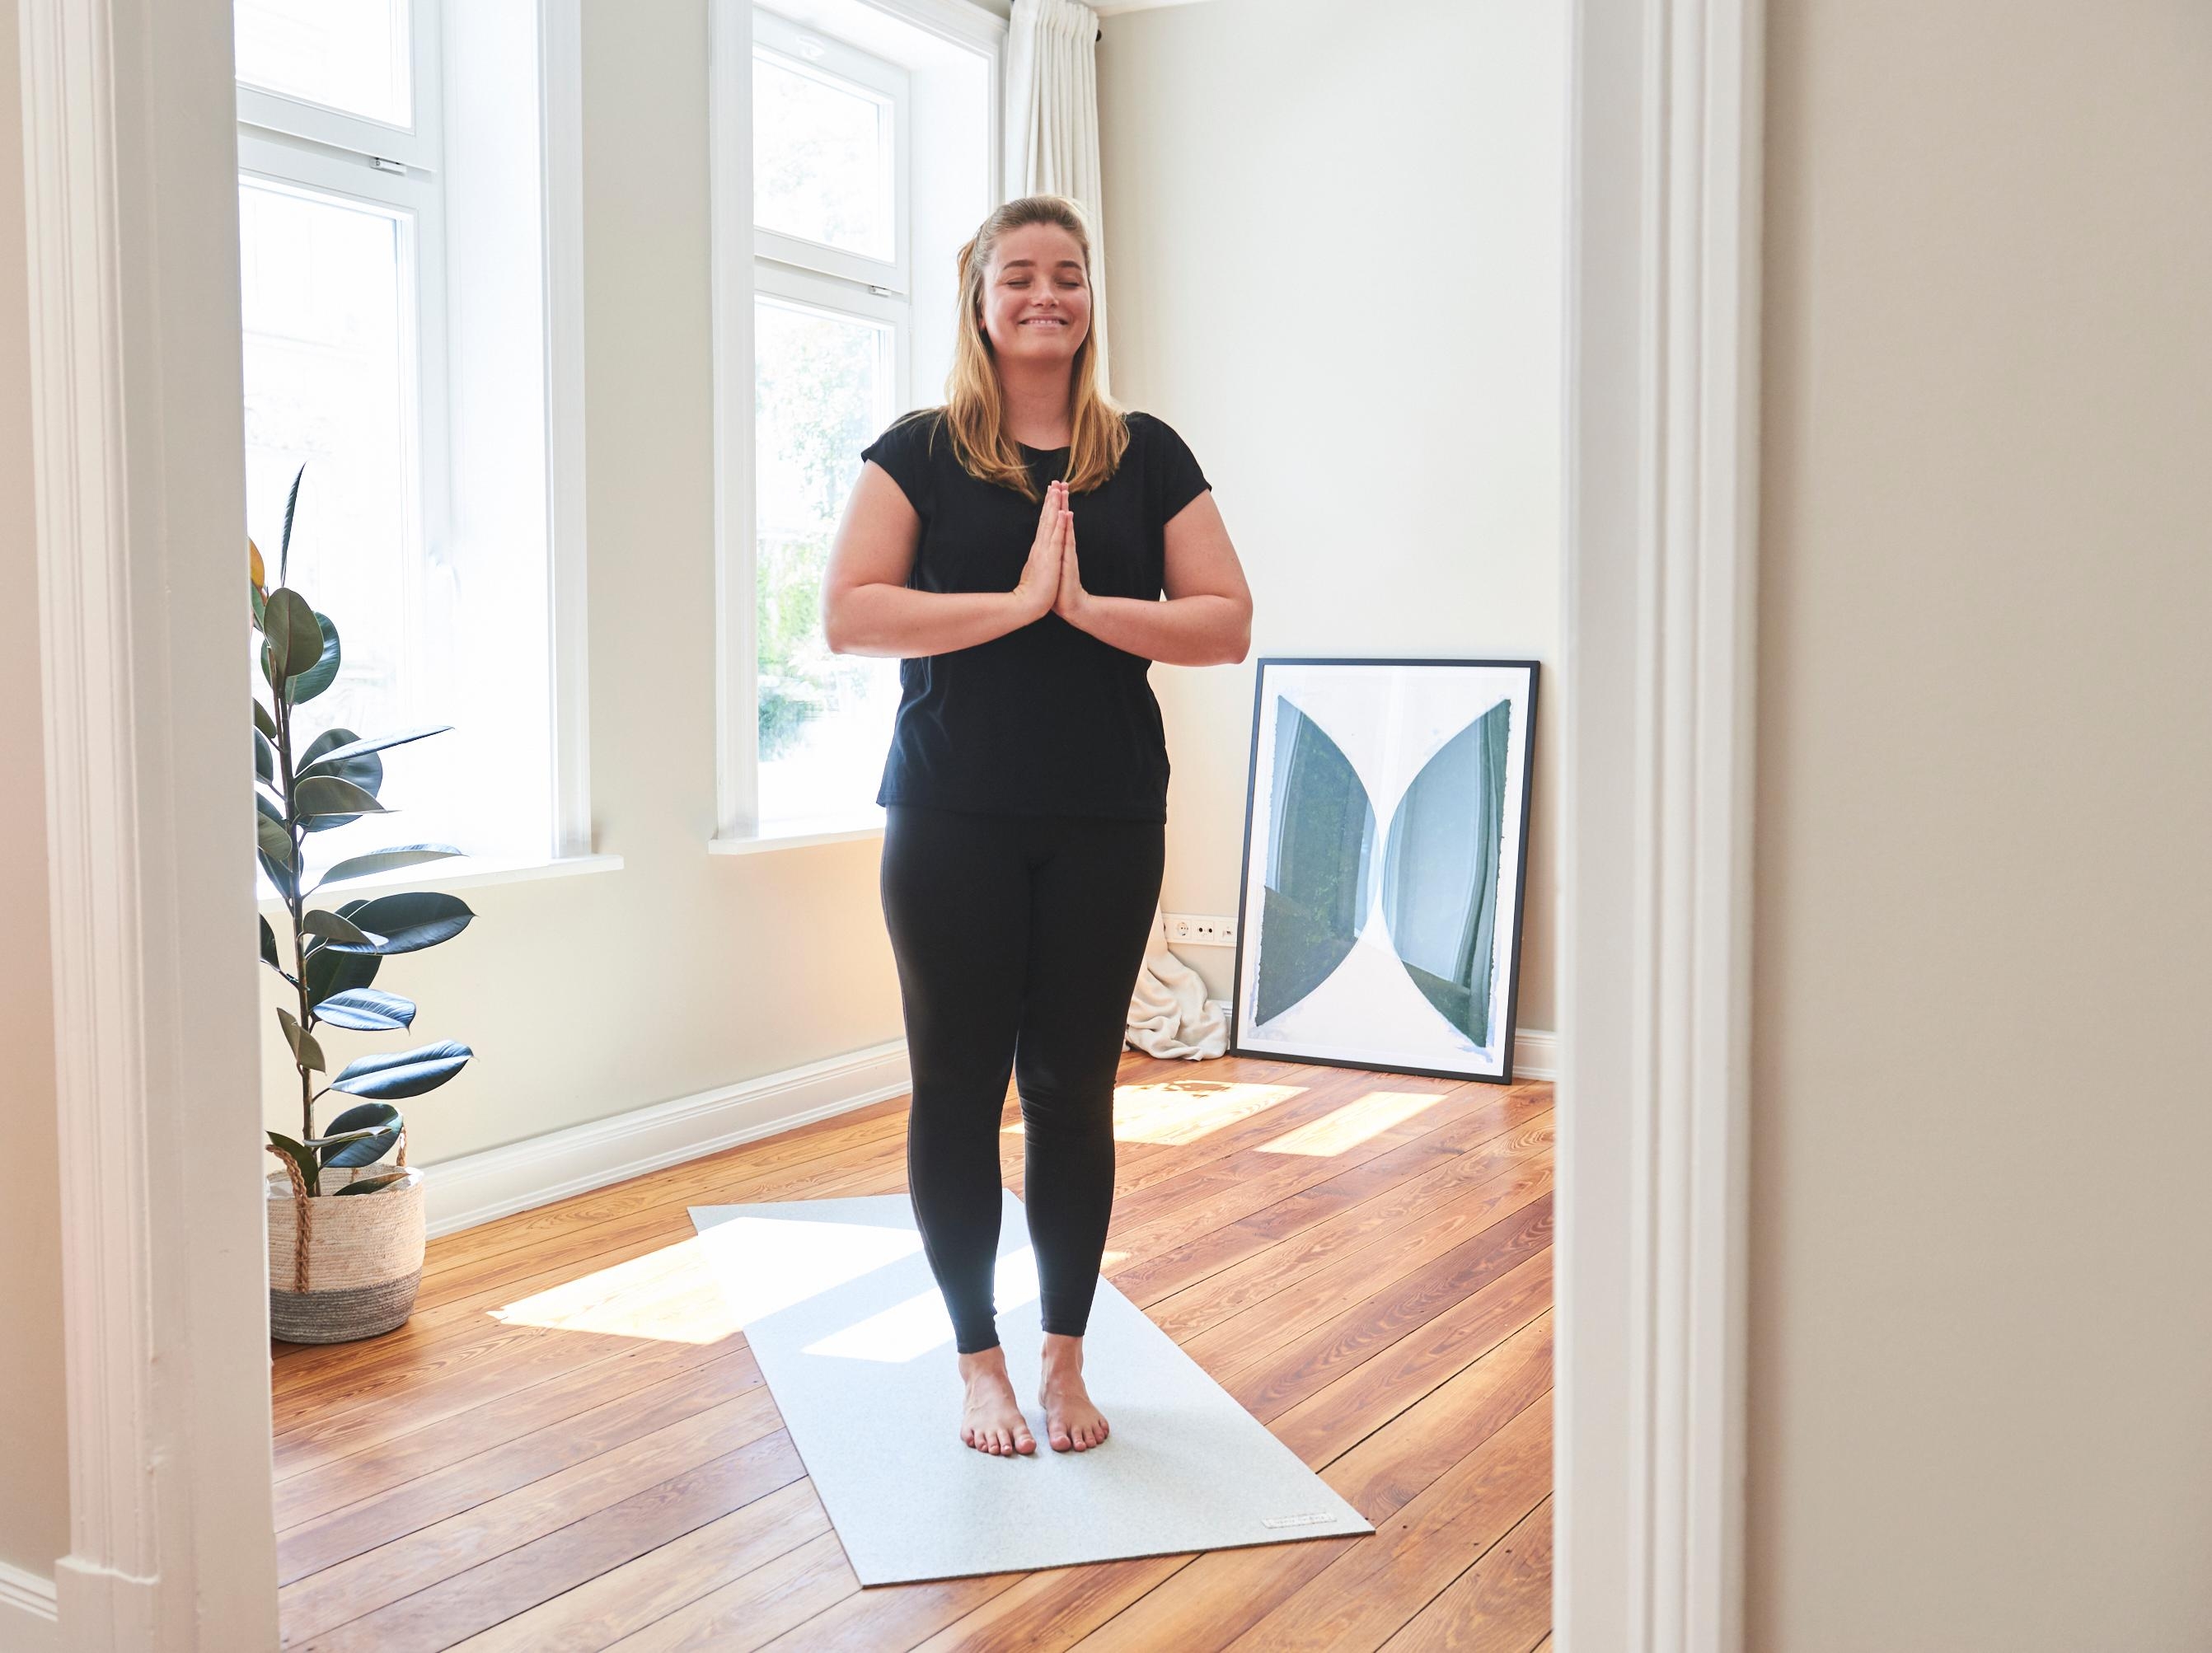 Yoga at home or in the studio? We can't decide! The mix makes it. #yogaathome